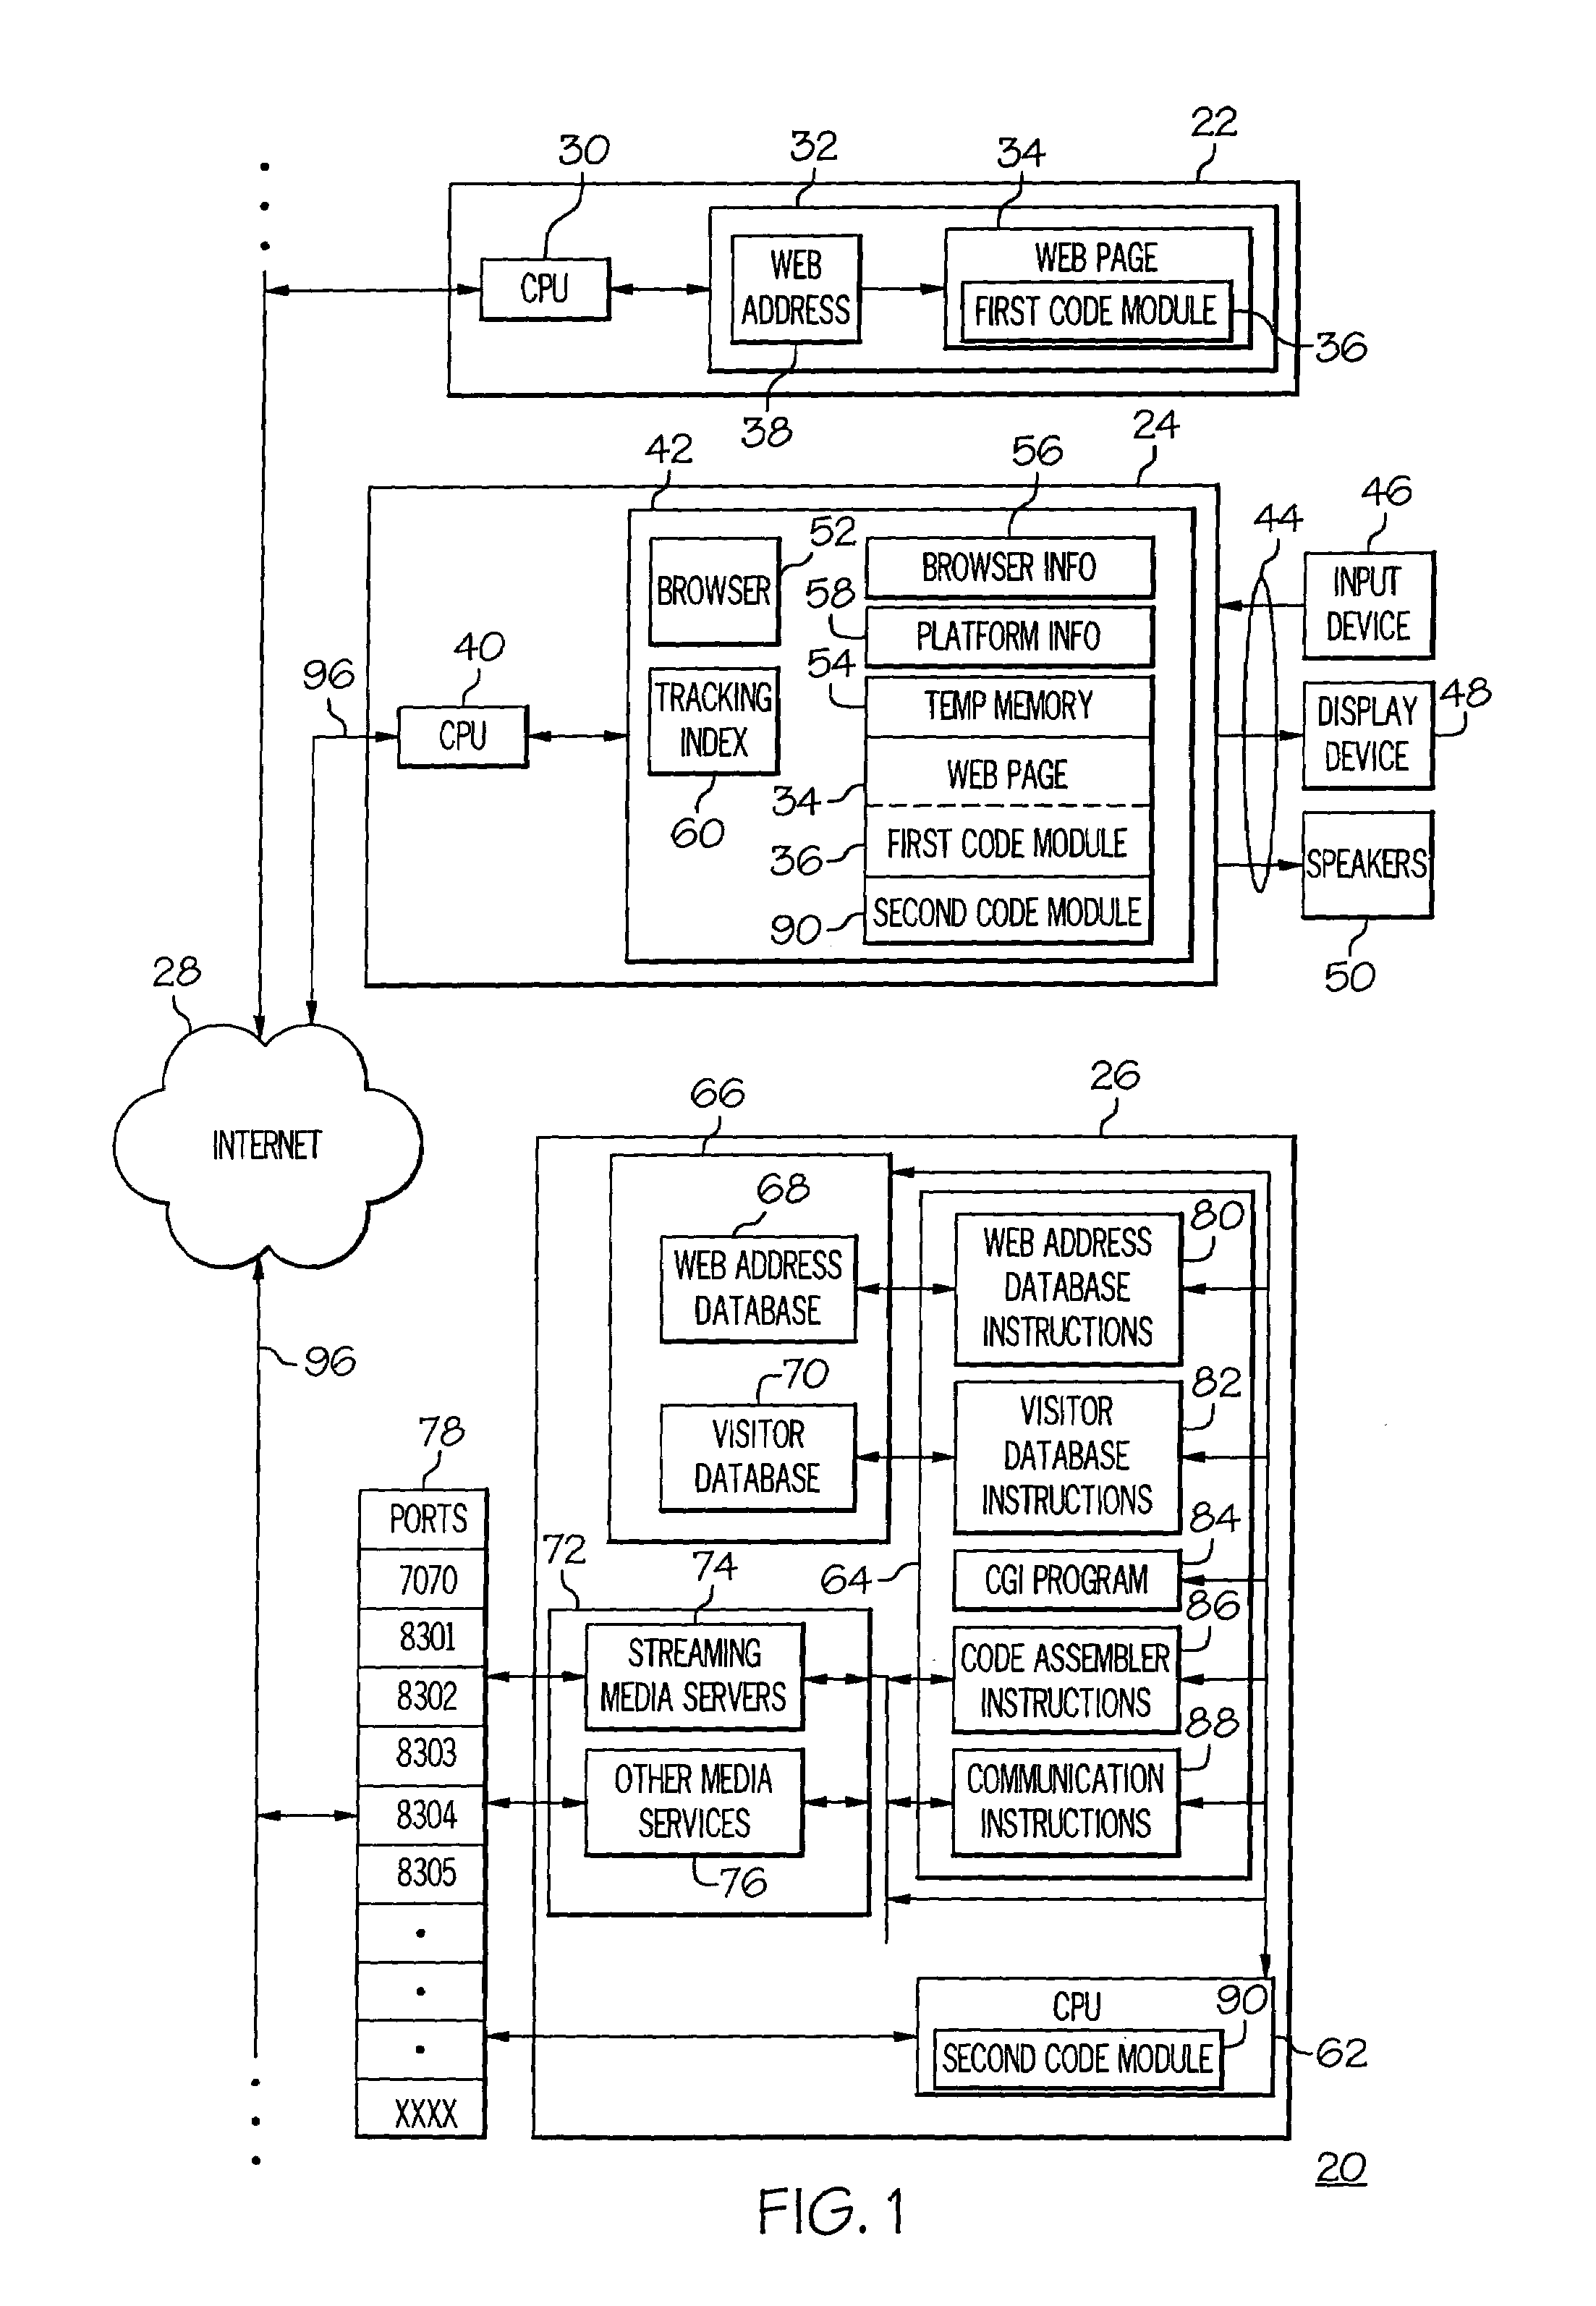 Method and code module for adding function to a Web page